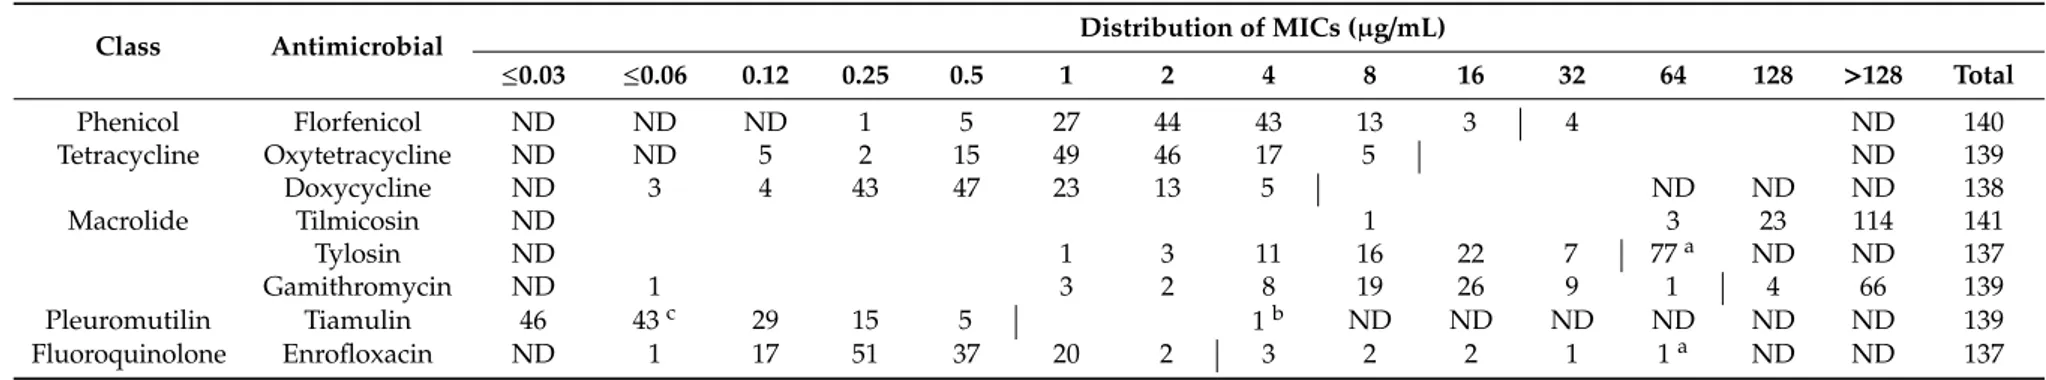 Table 1. Distribution of minimum inhibitory concentration (MIC) values (µg/mL) of 141 M